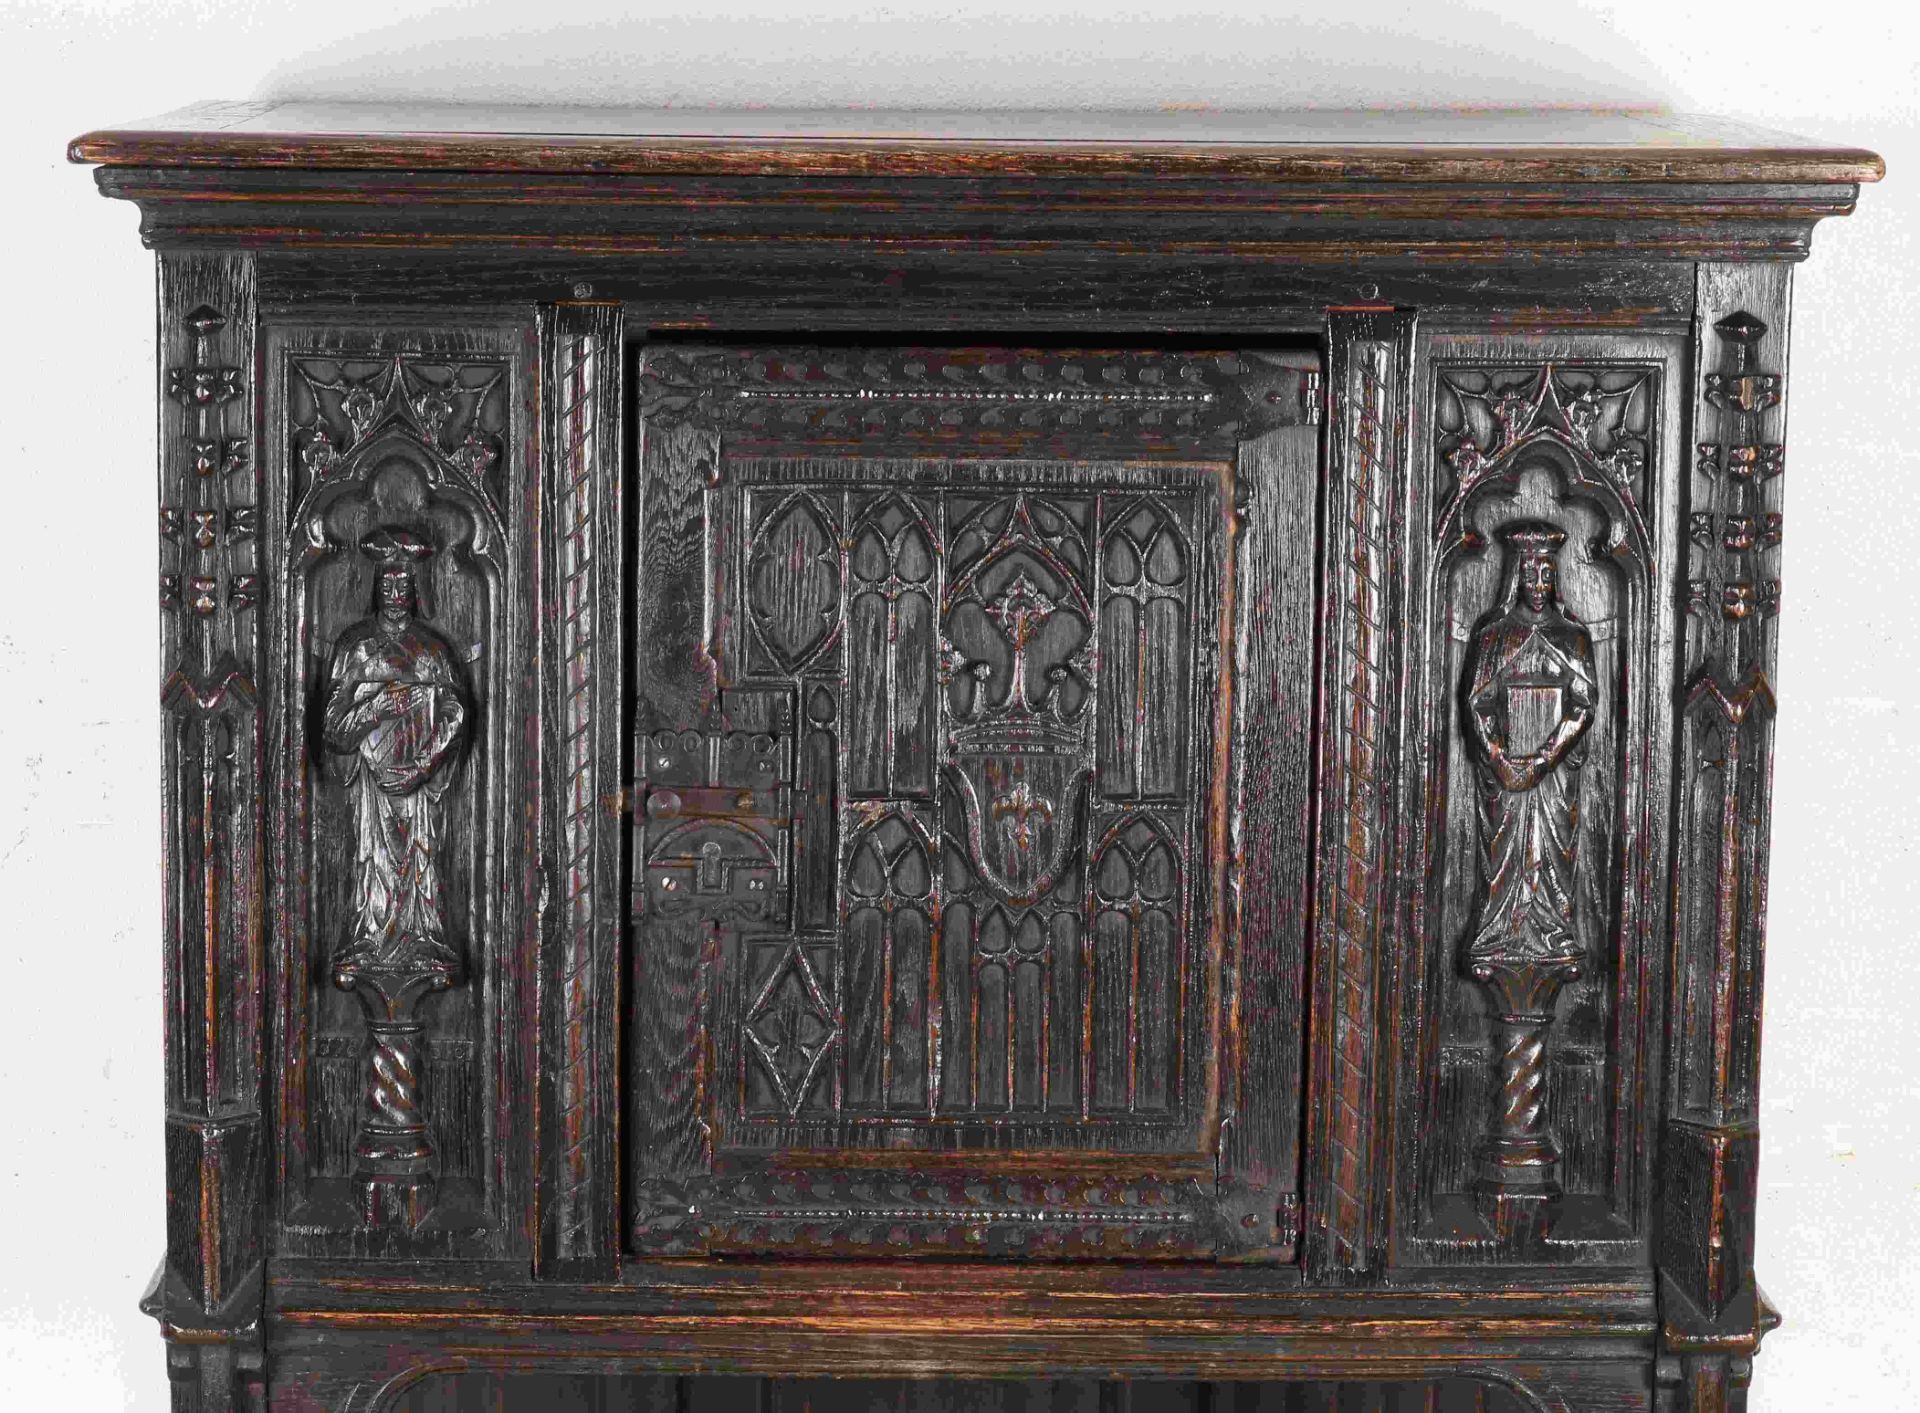 French neo-gothic cabinet - Image 2 of 2